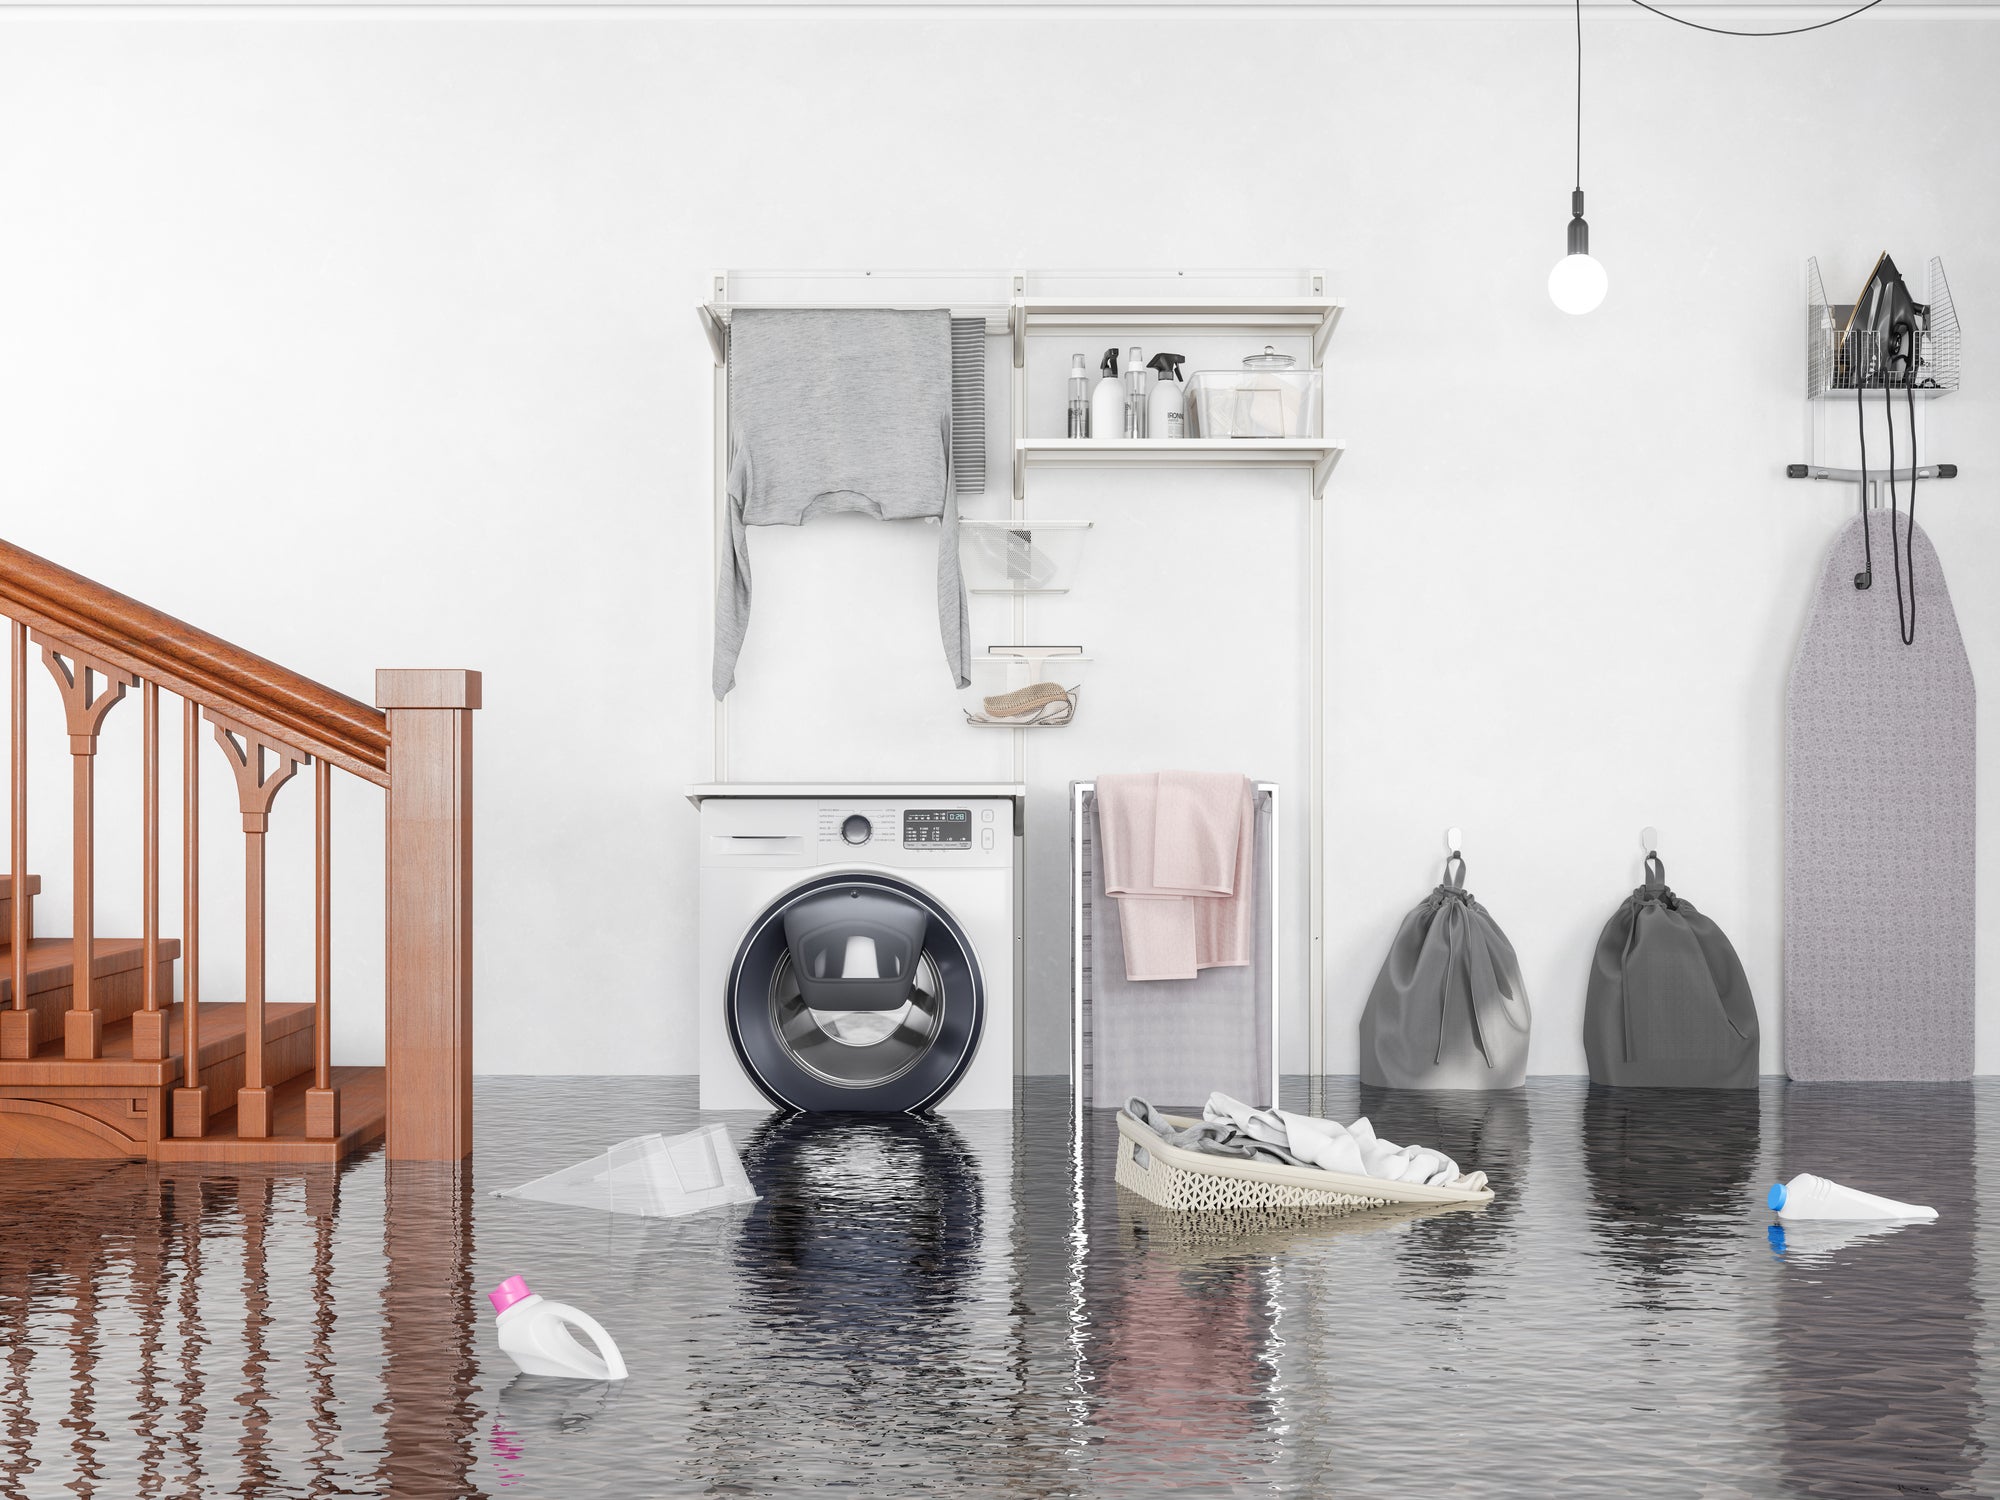 flooded laundry room with staircase to the left of a washer, dryer, and ironing board